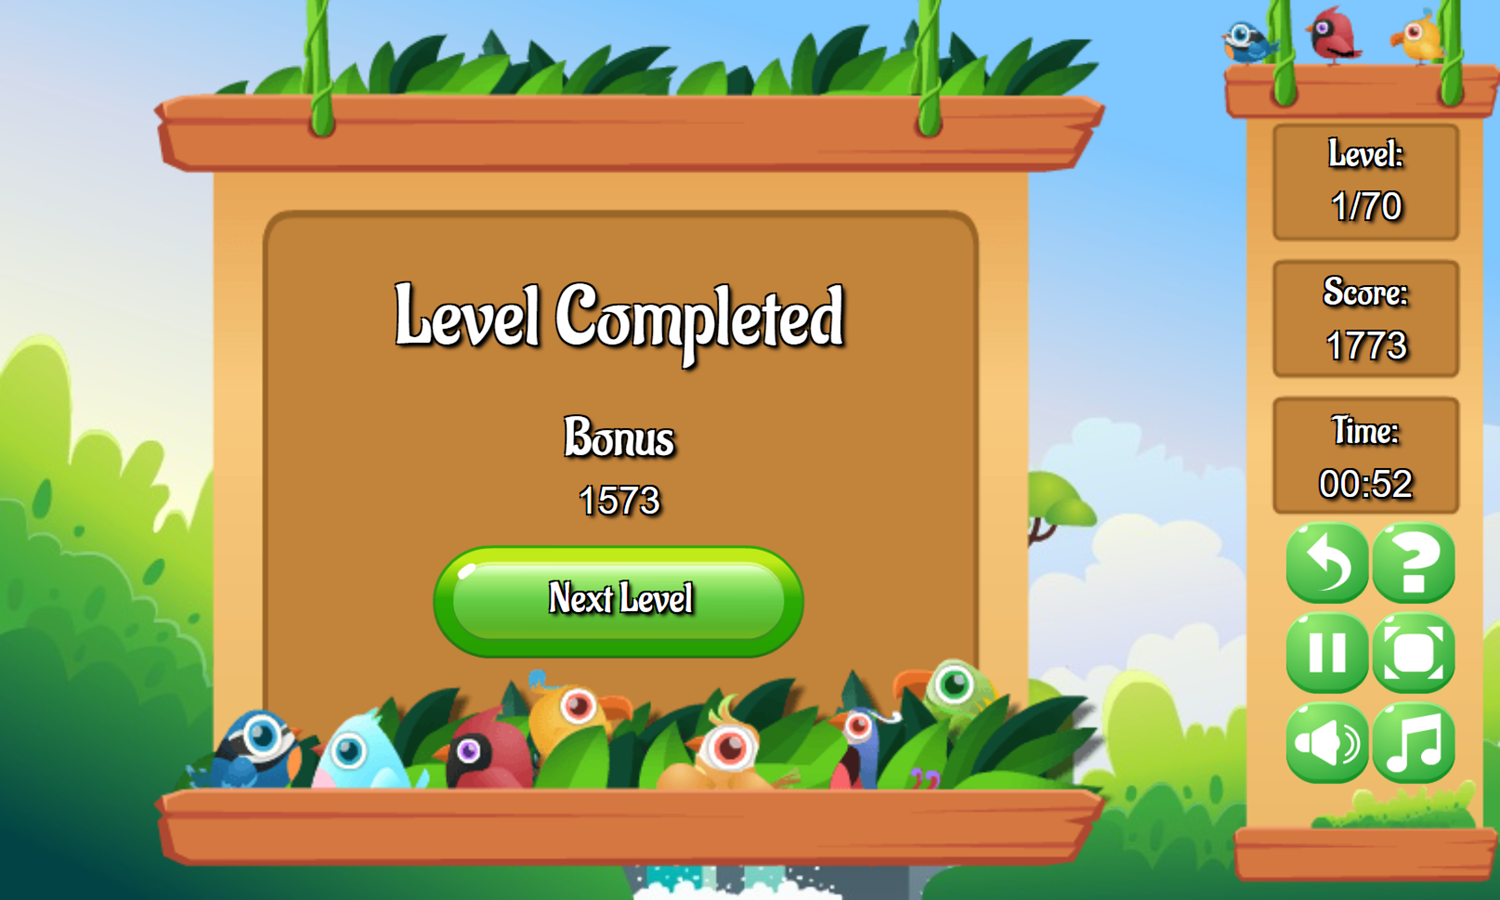 Birds Kyodai Game Level Completed Screenshot.